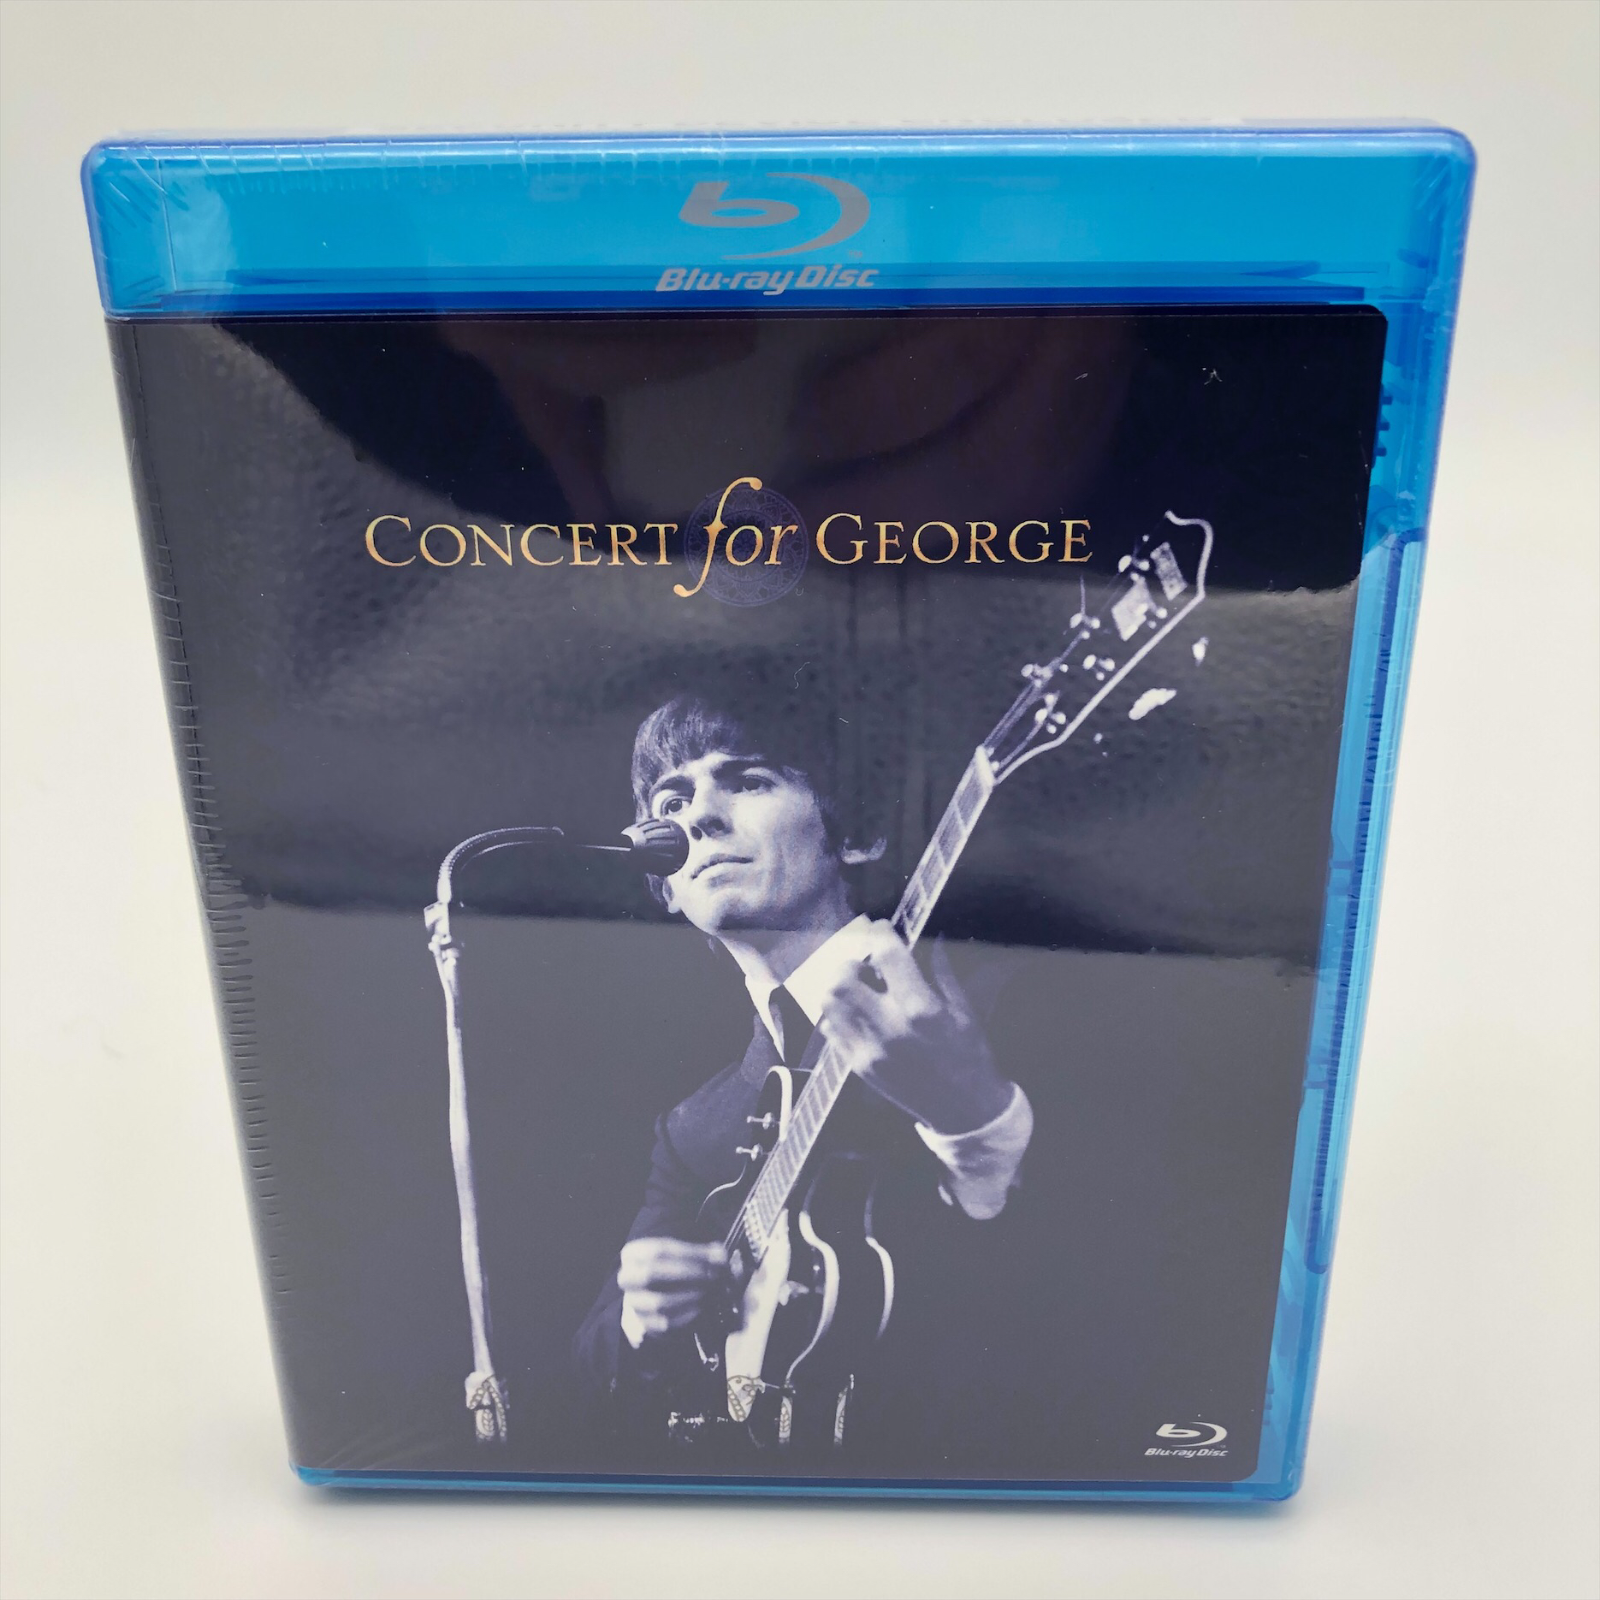 Concert for George on Blu Ray 2-Disc Set